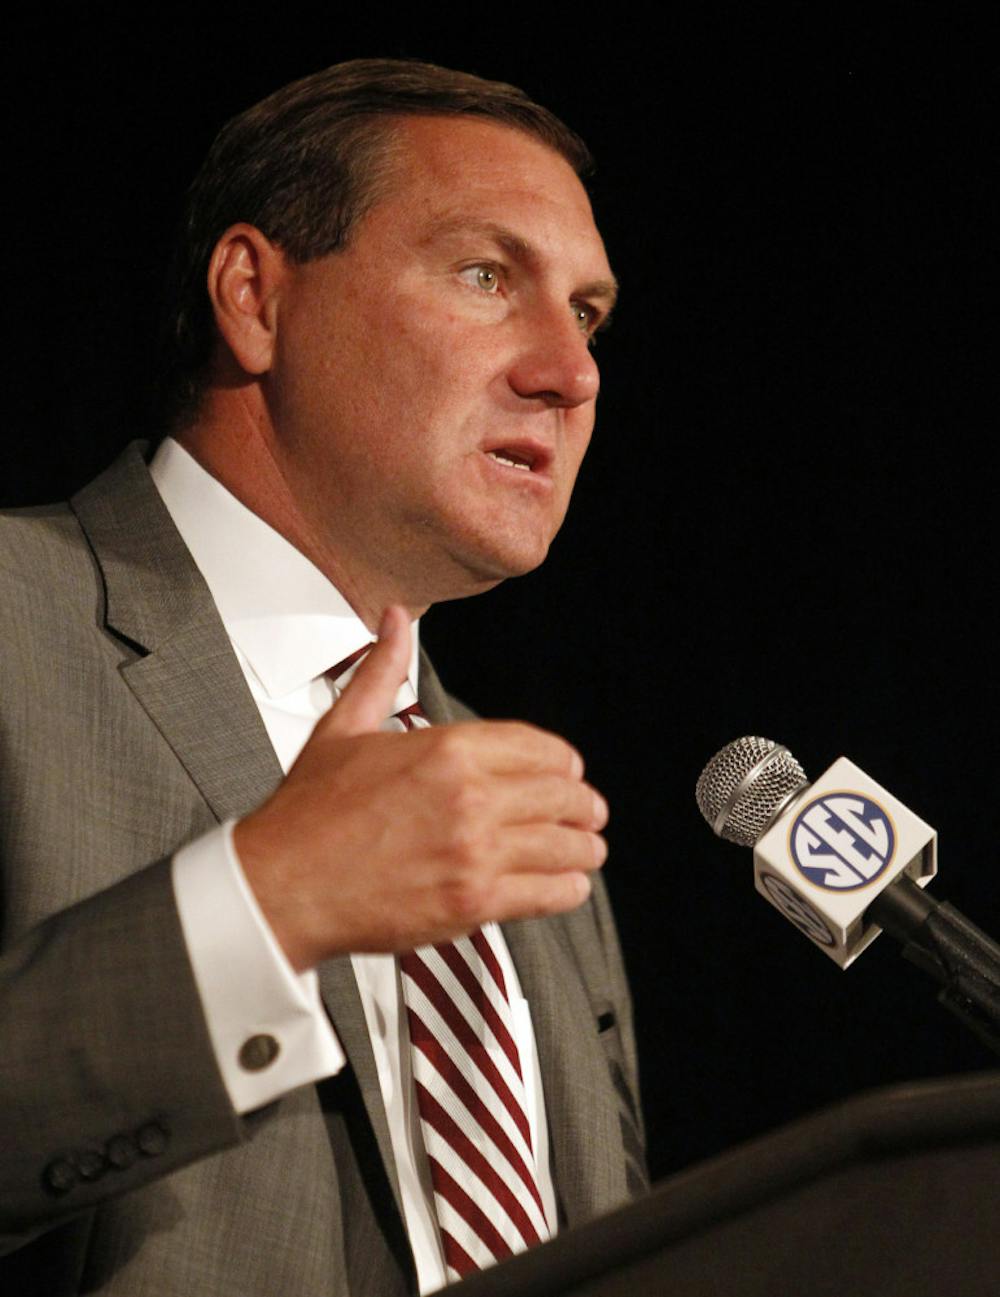 <p>Mississippi State coach Dan Mullen speaks to media at the Southeastern Conference NCAA college football media days on Tuesday in Hoover, Ala.</p>